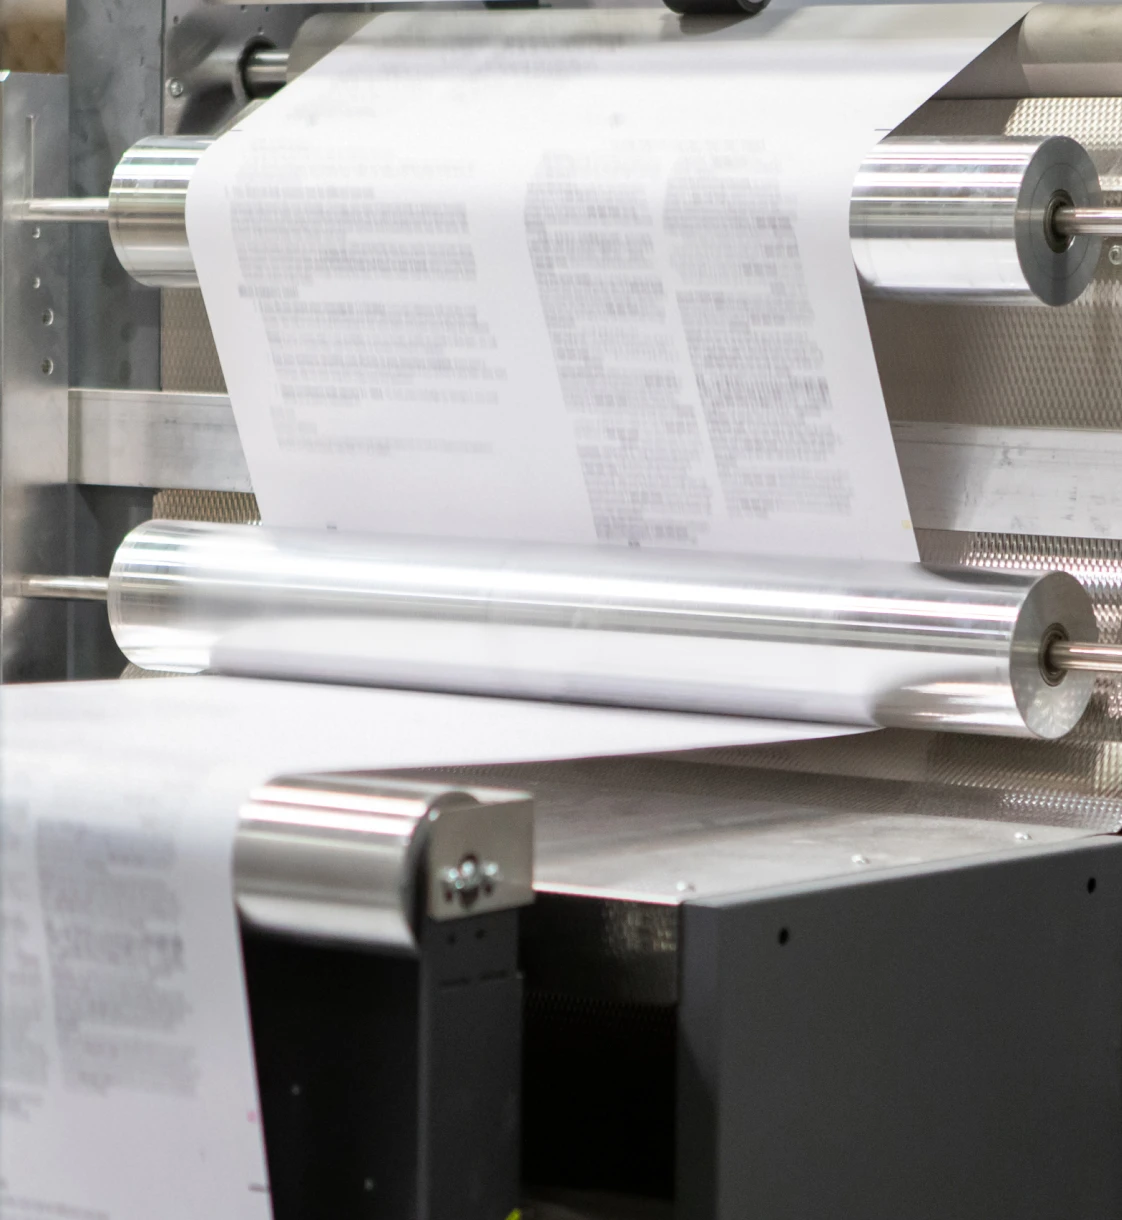 Paper rolling through an industrial printing machine